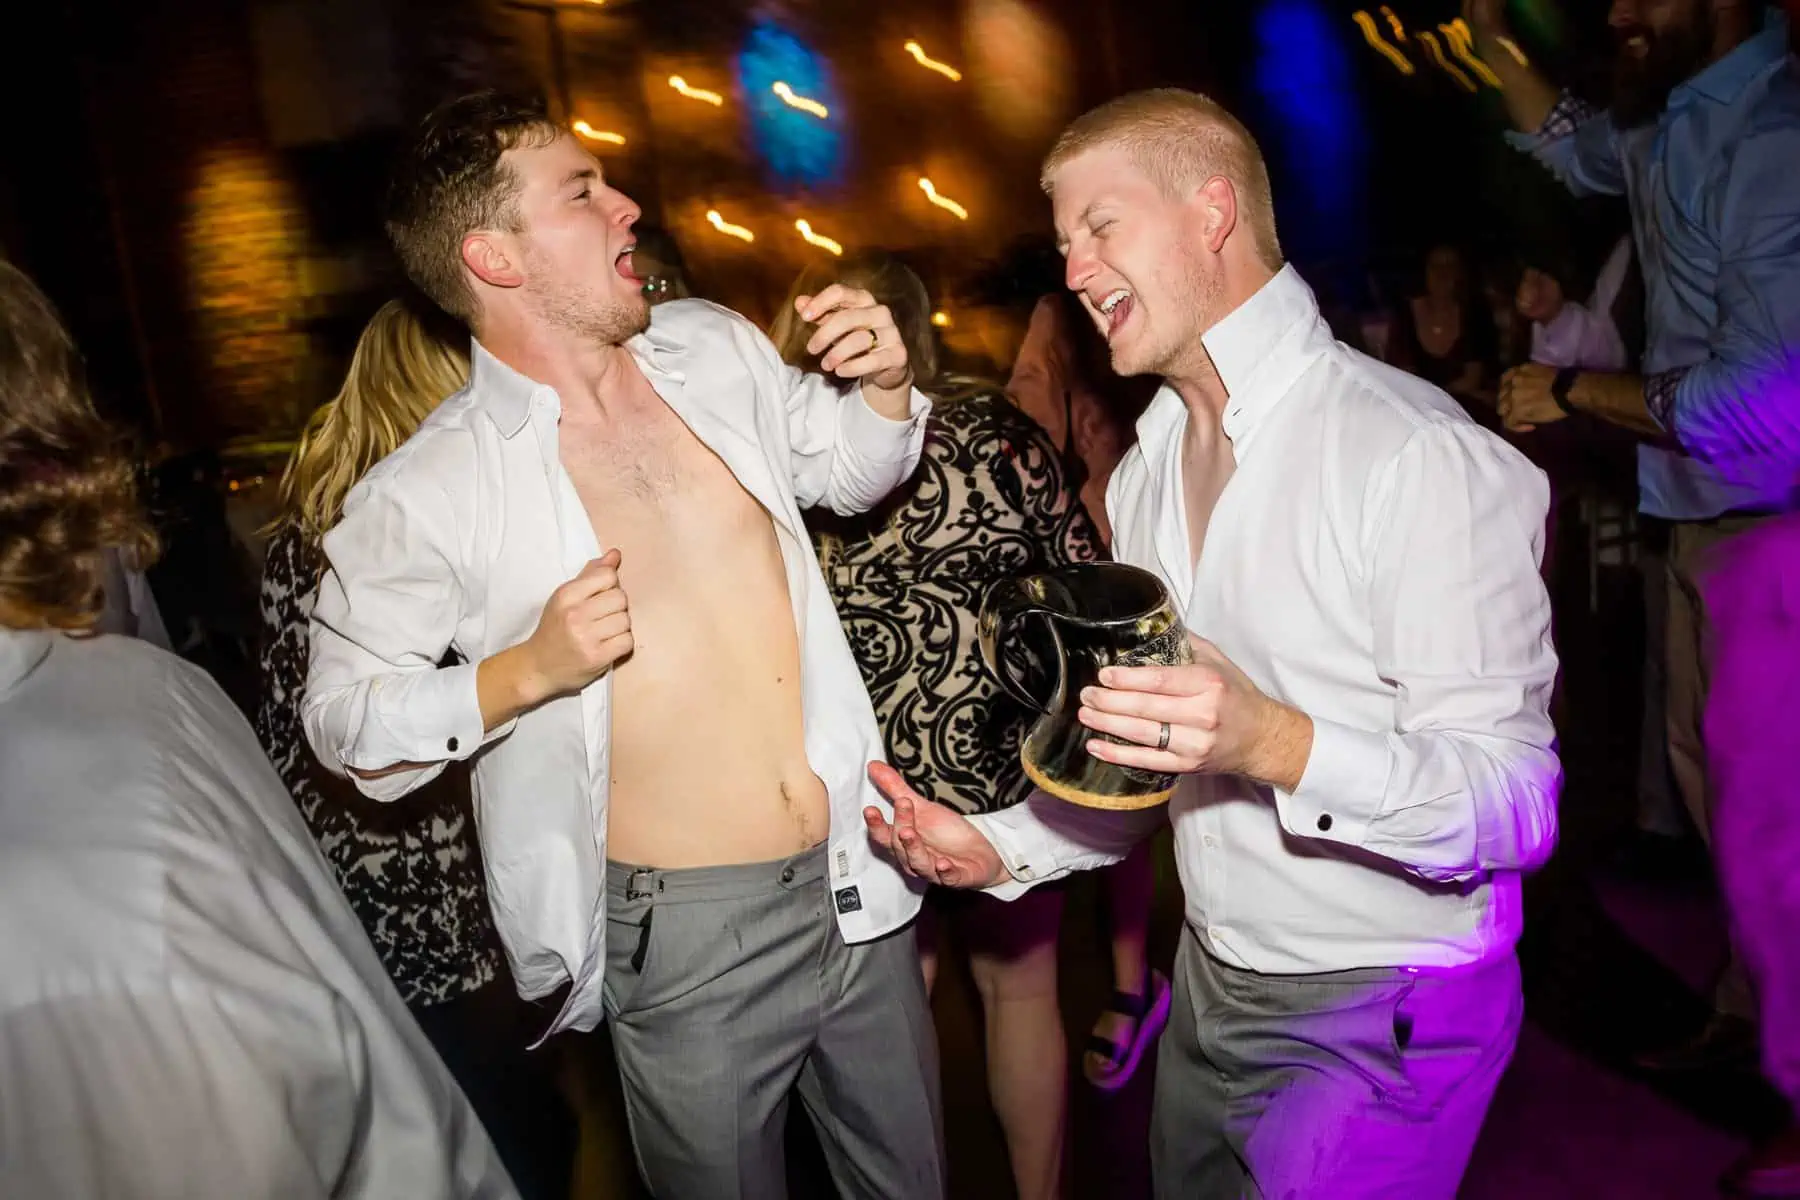 Two men dancing on the dance floor at a party.